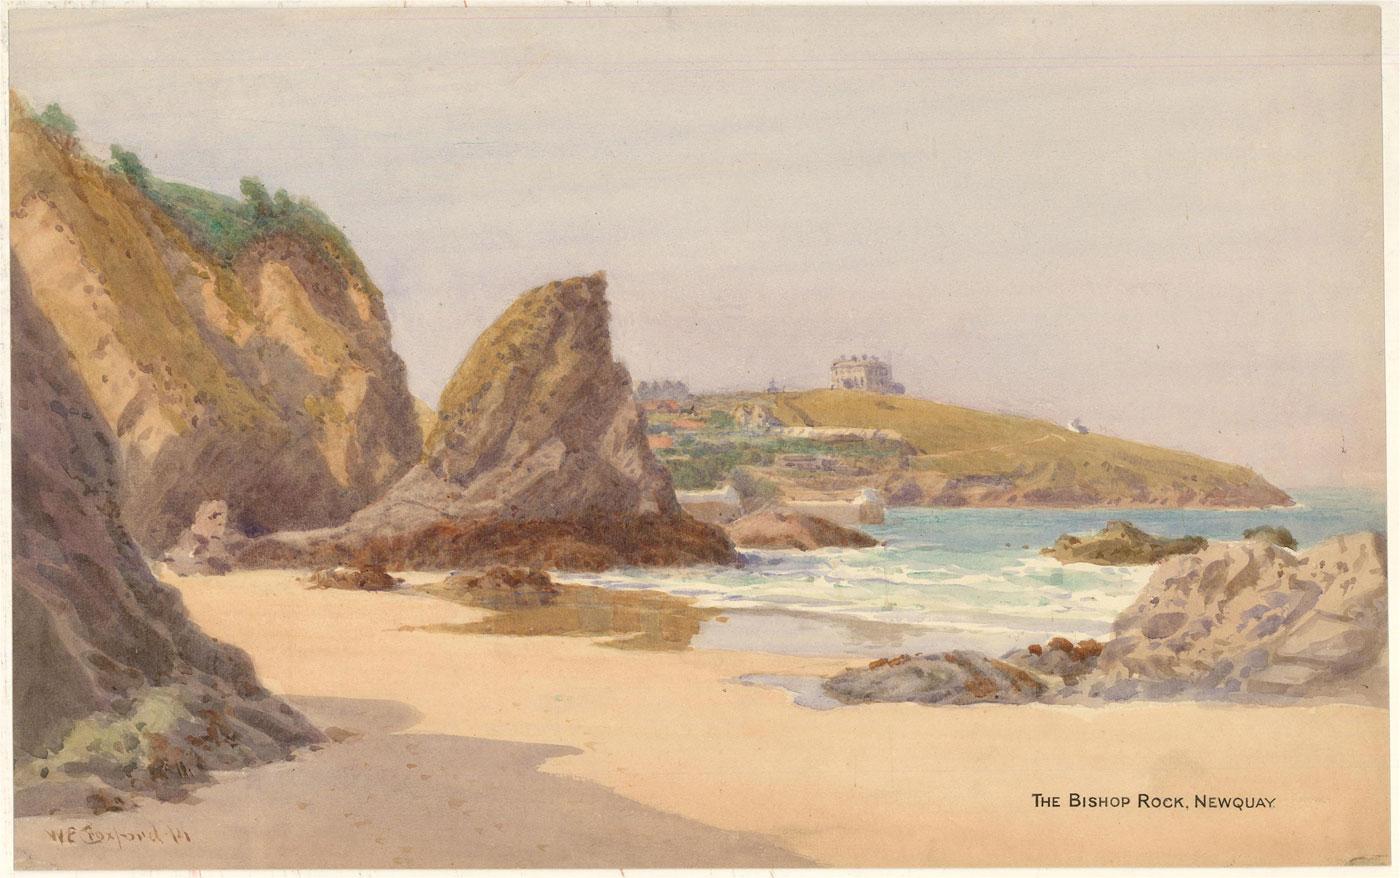 William Edward Croxford (1852-1926) - 1921 Watercolour, The Bishop Rock, Newquay For Sale 1